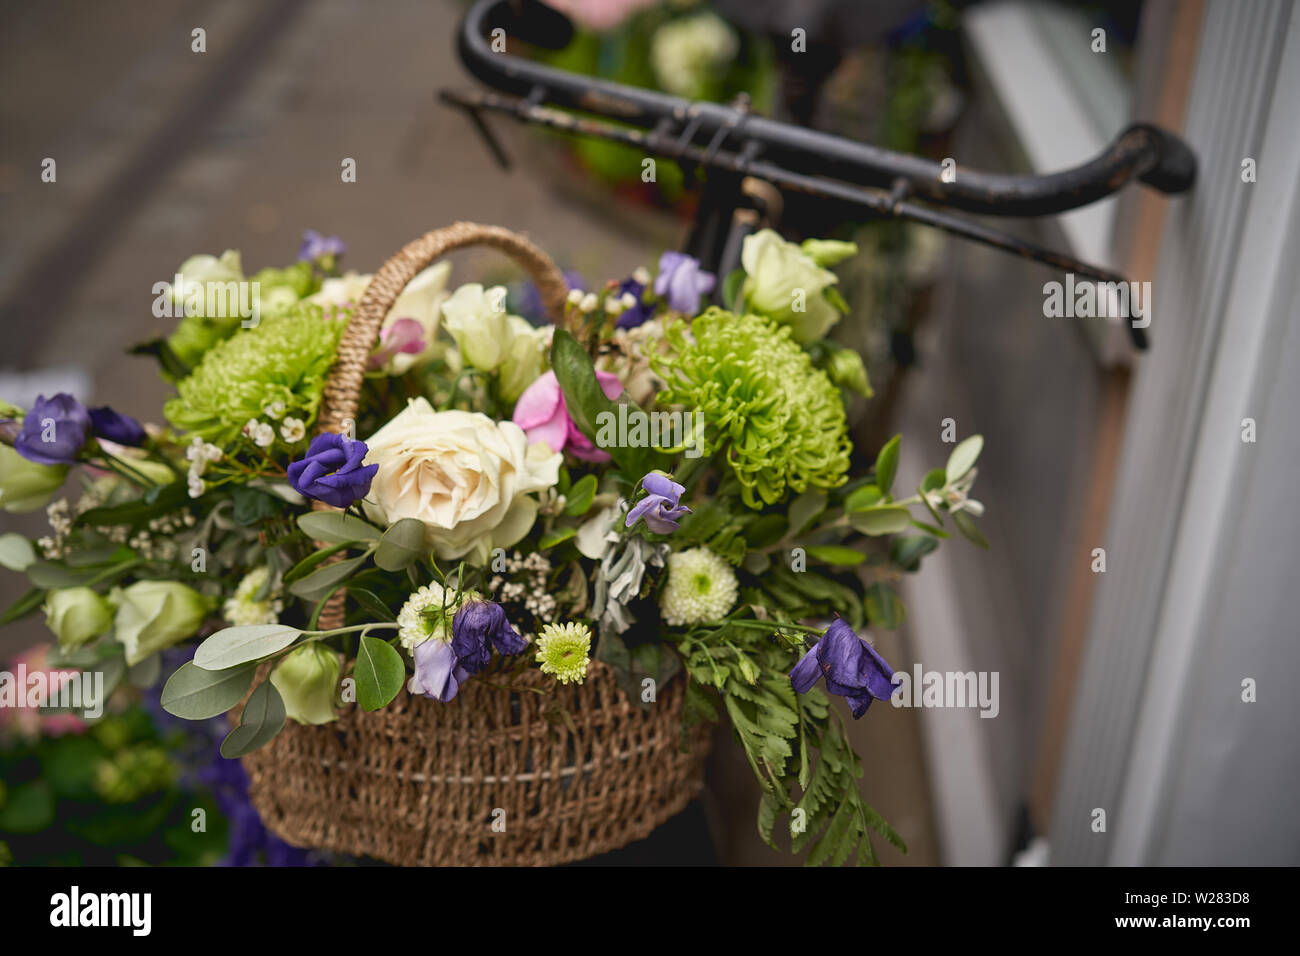 Detail of a parked vintage black bicycle with a bunch of fresh flowers in the front wooden basket. Landscape format. Stock Photo